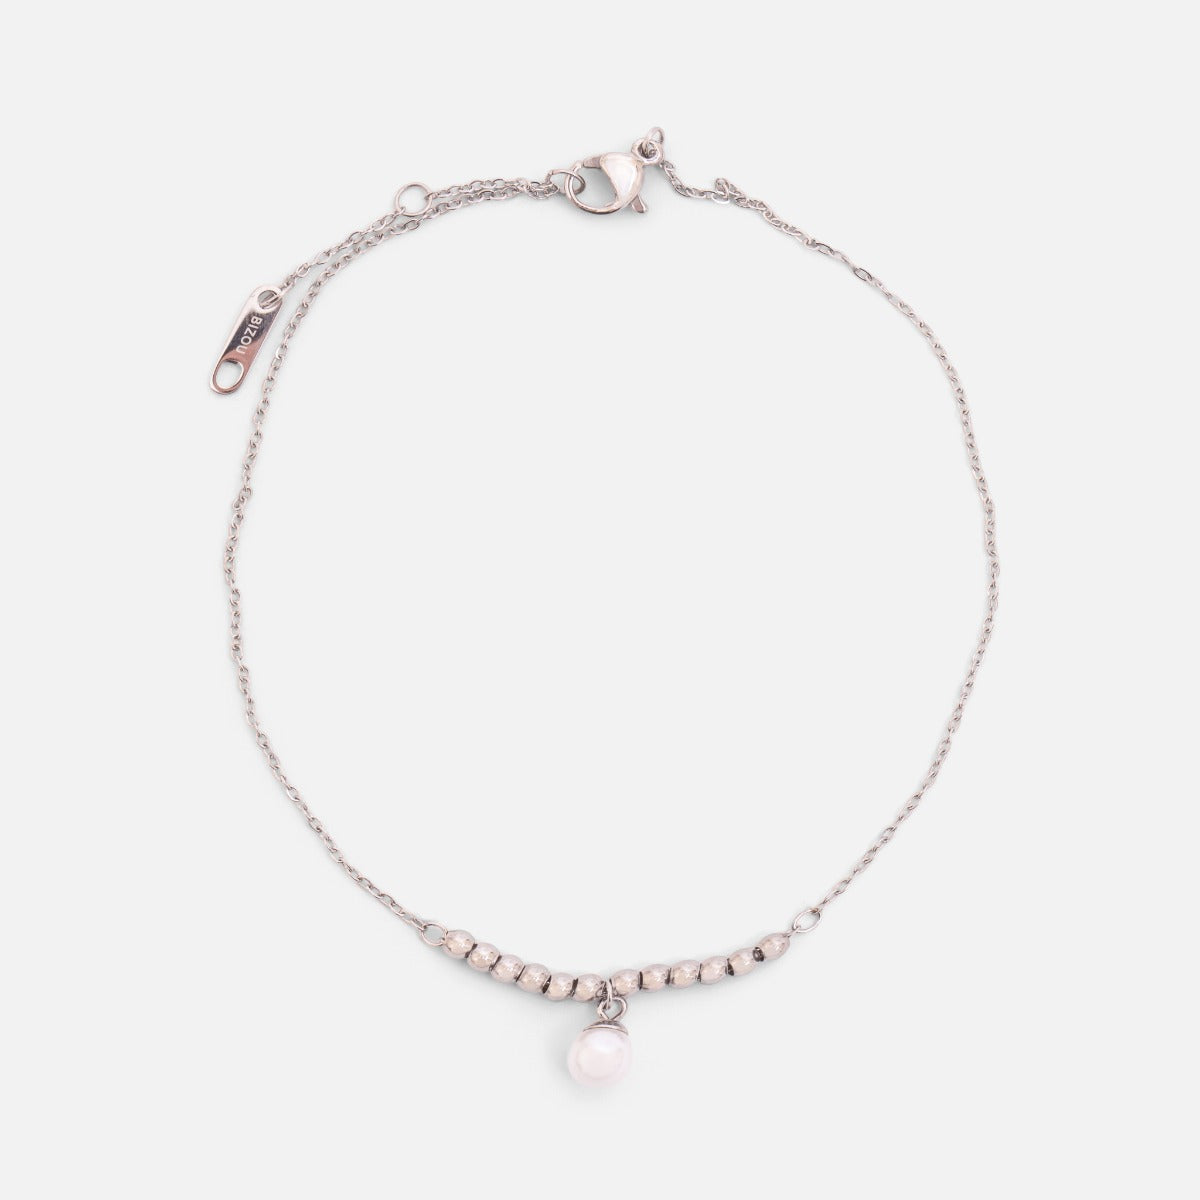 Tiny silver stainless steel ankle chain with small beads and pearl charm